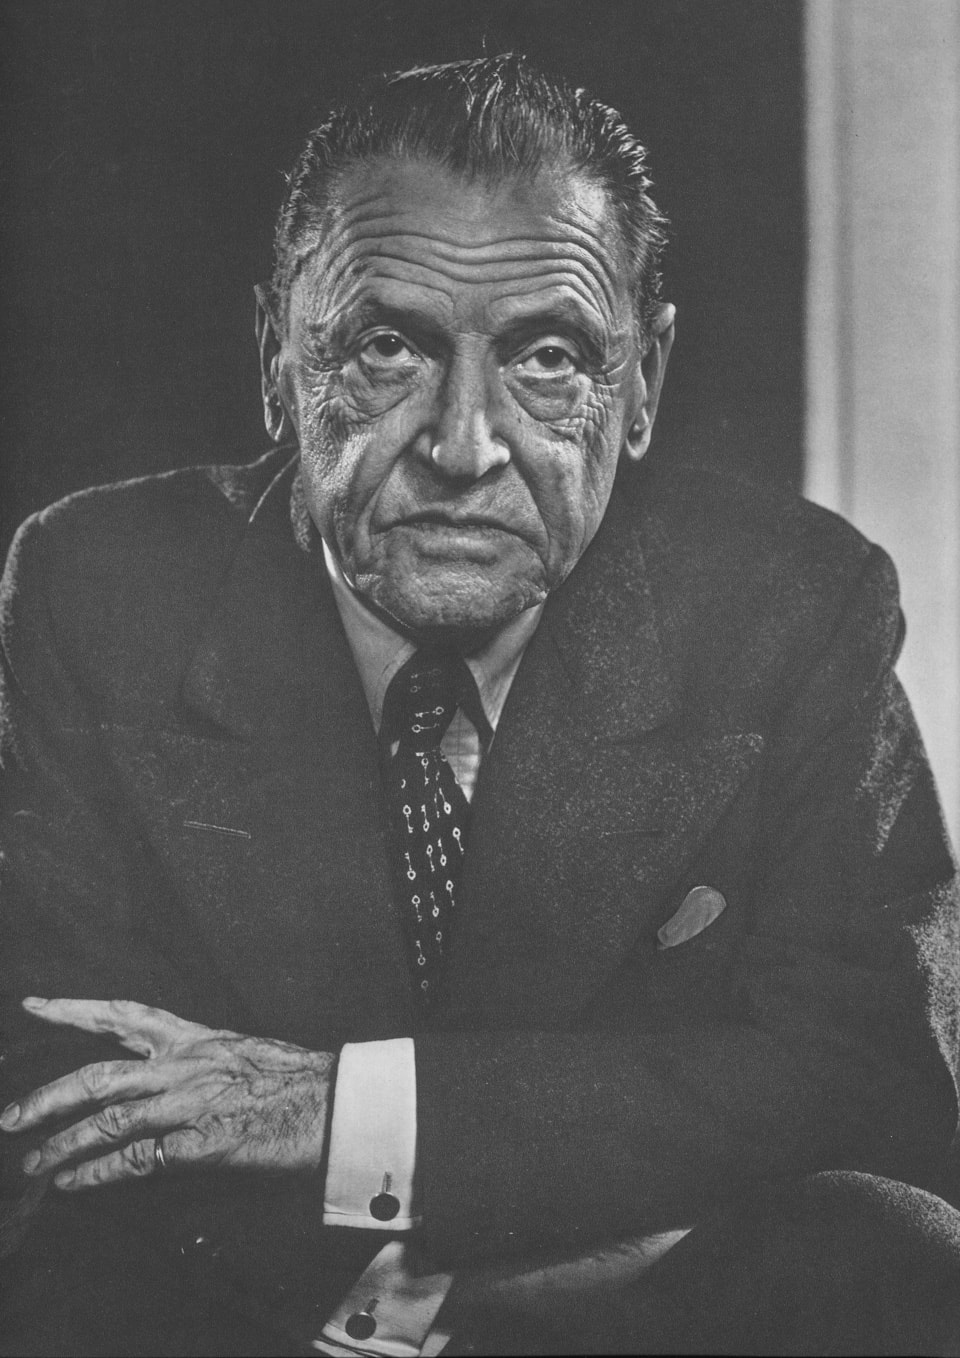 William Somerset Maugham by Yousuf Karsh, 1950